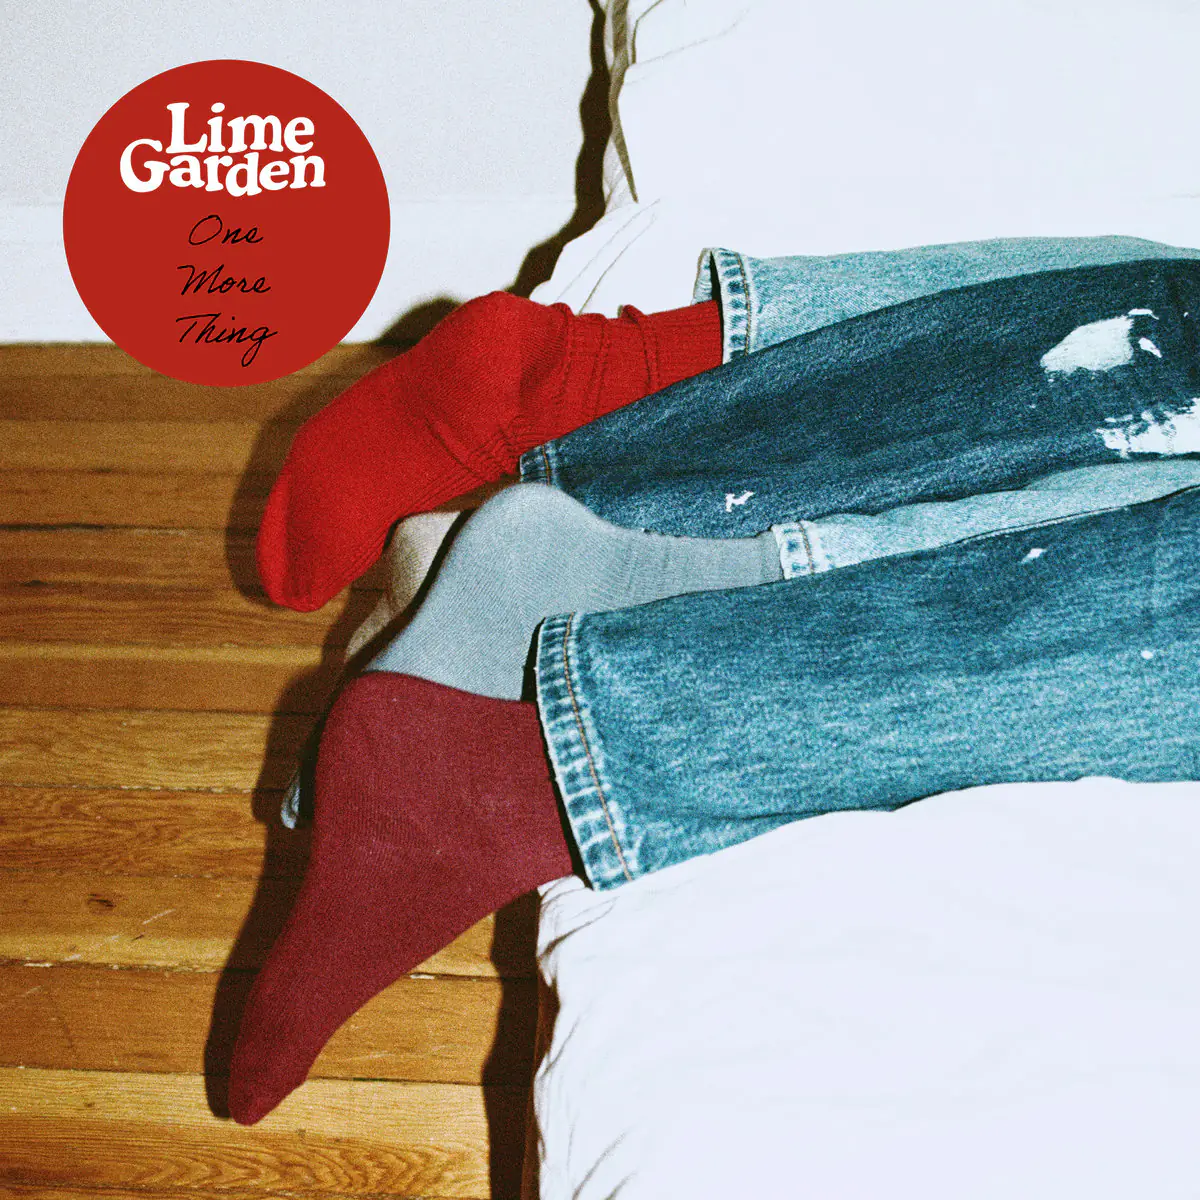 ALBUM REVIEW: Lime Garden – One More Thing